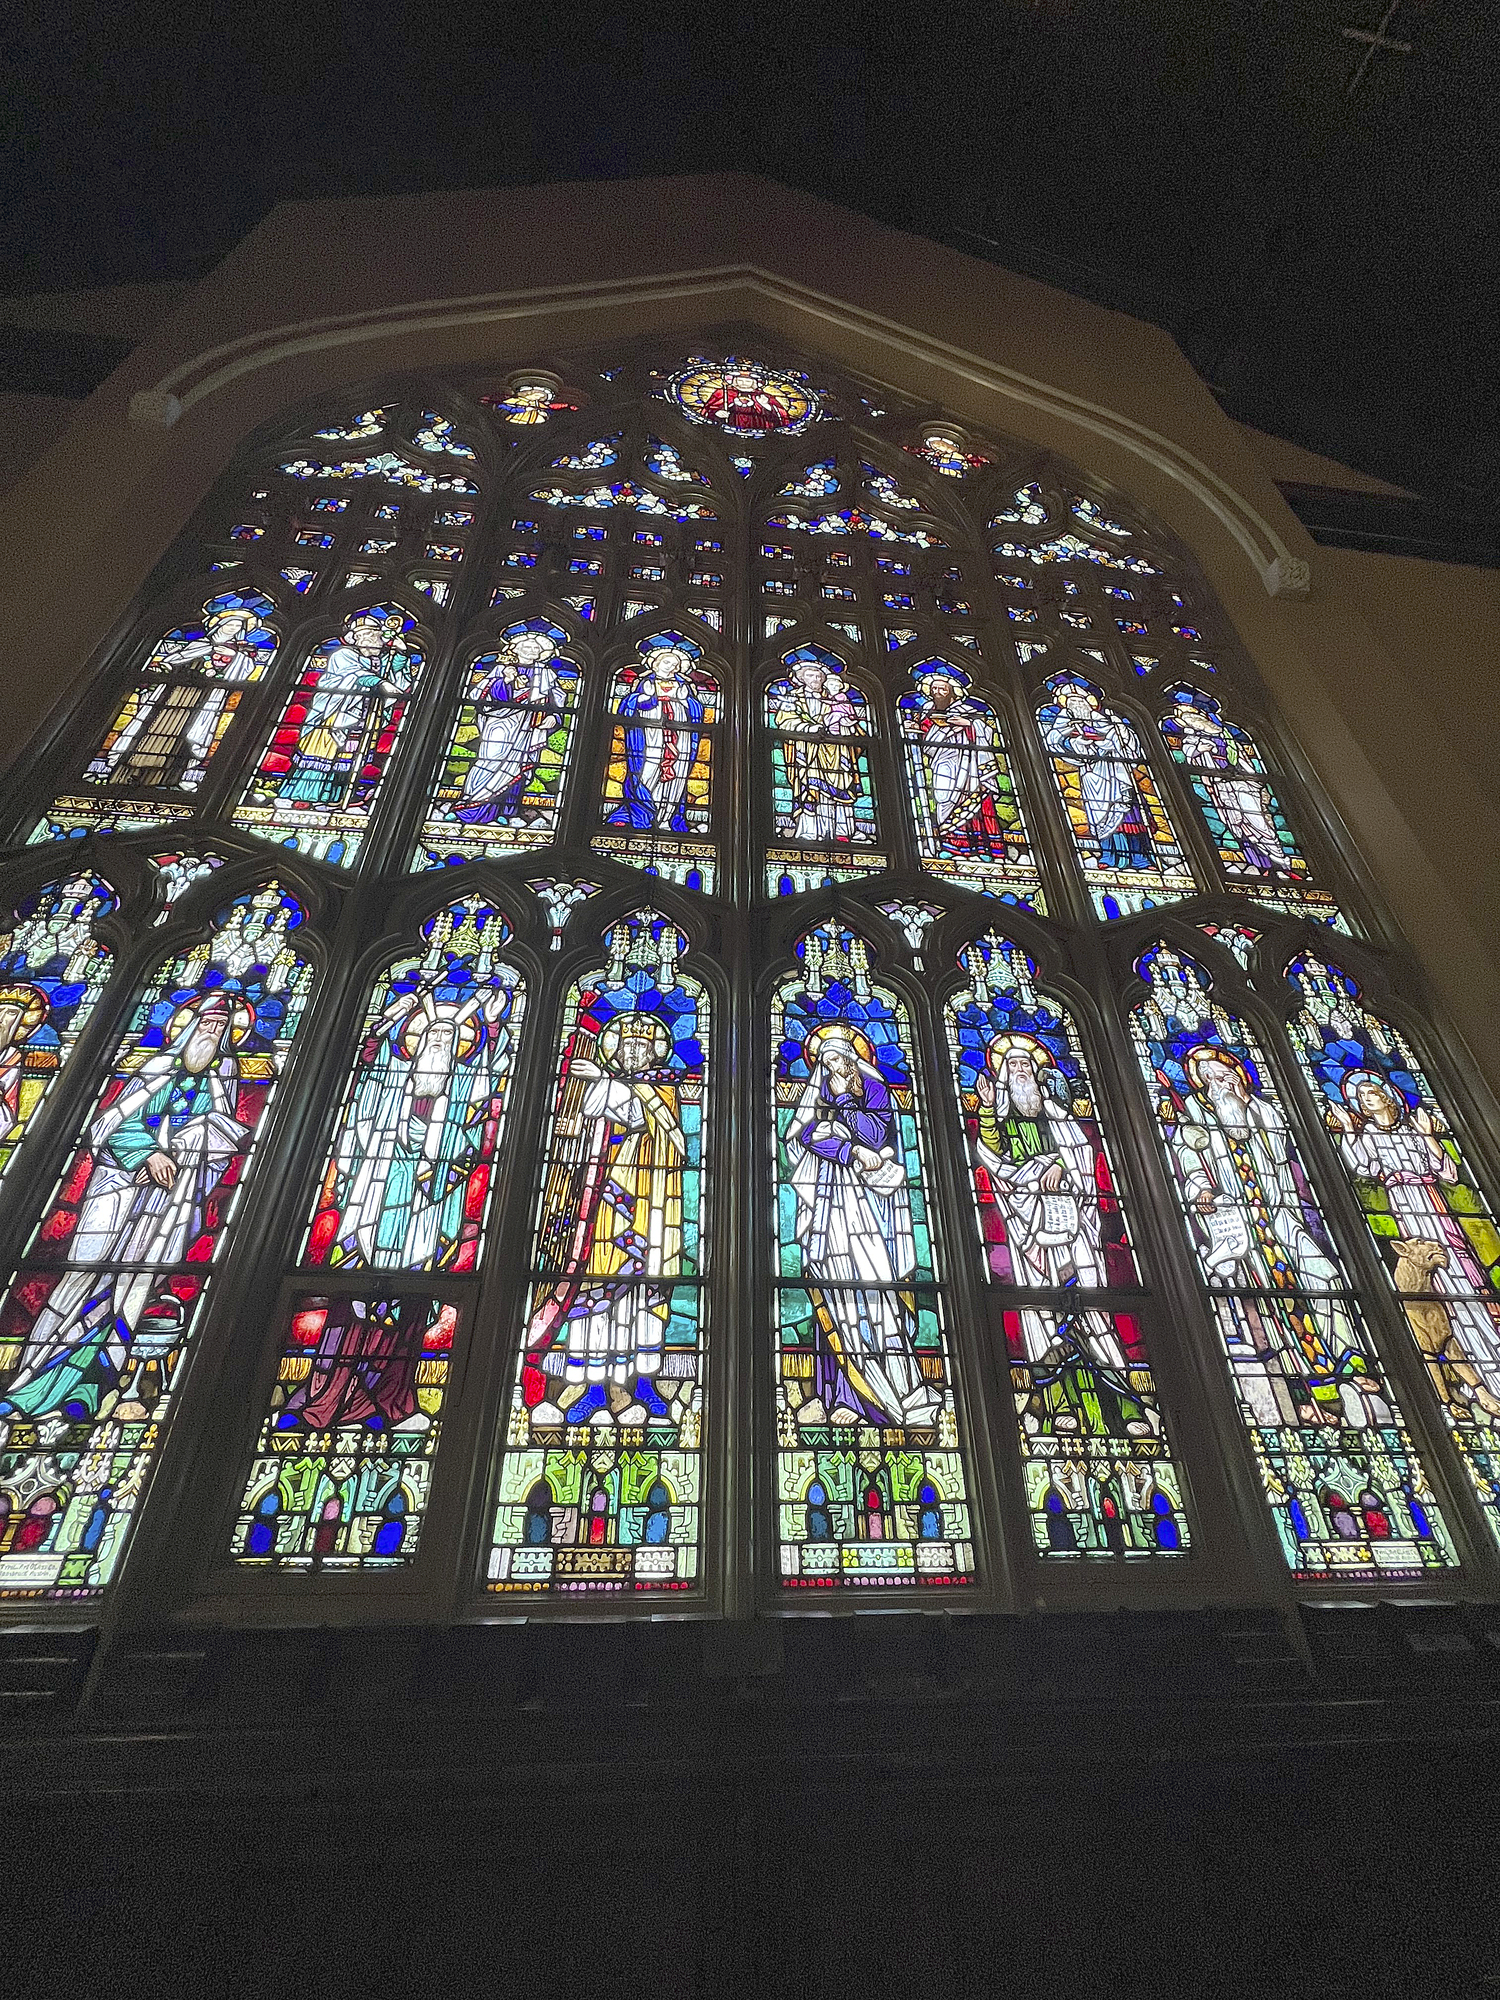 The Basilica Parish of Sacred Hearts of Jesus and Mary in Southampton Village received a $15,000 Sacred Sites grant from the Robert David Lion Gardiner Foundation to repair the front stained glass window.   DANA SHAW